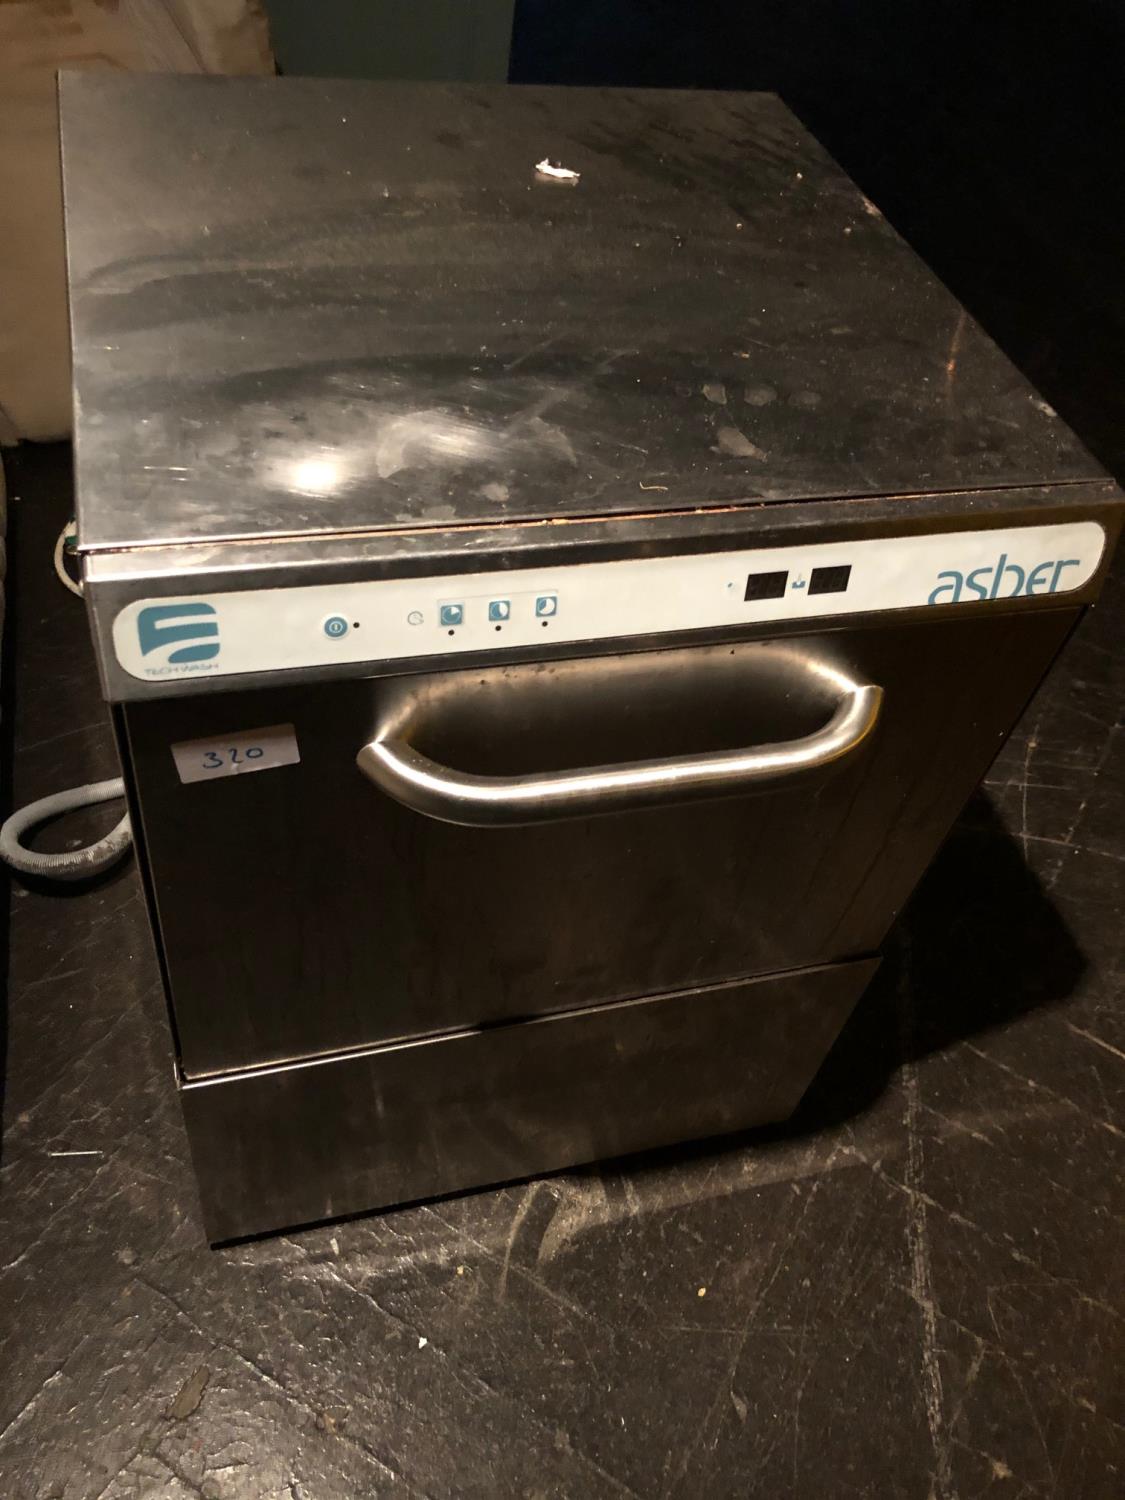 Asber undercounter glass washer. - Image 2 of 2